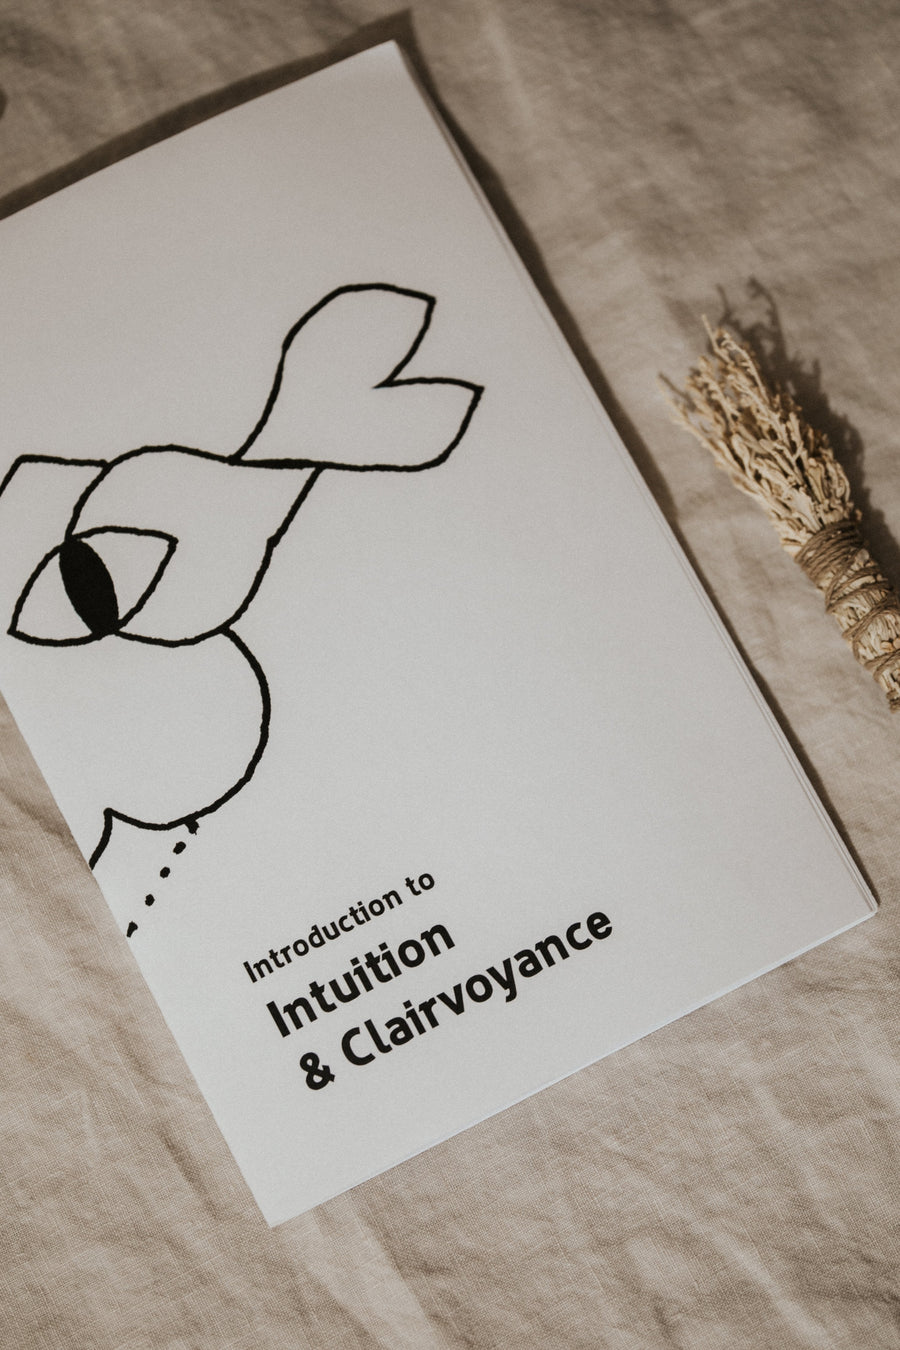 School of Life Design Objects White / FINAL SALE Introduction to Intuition & Clairvoyance